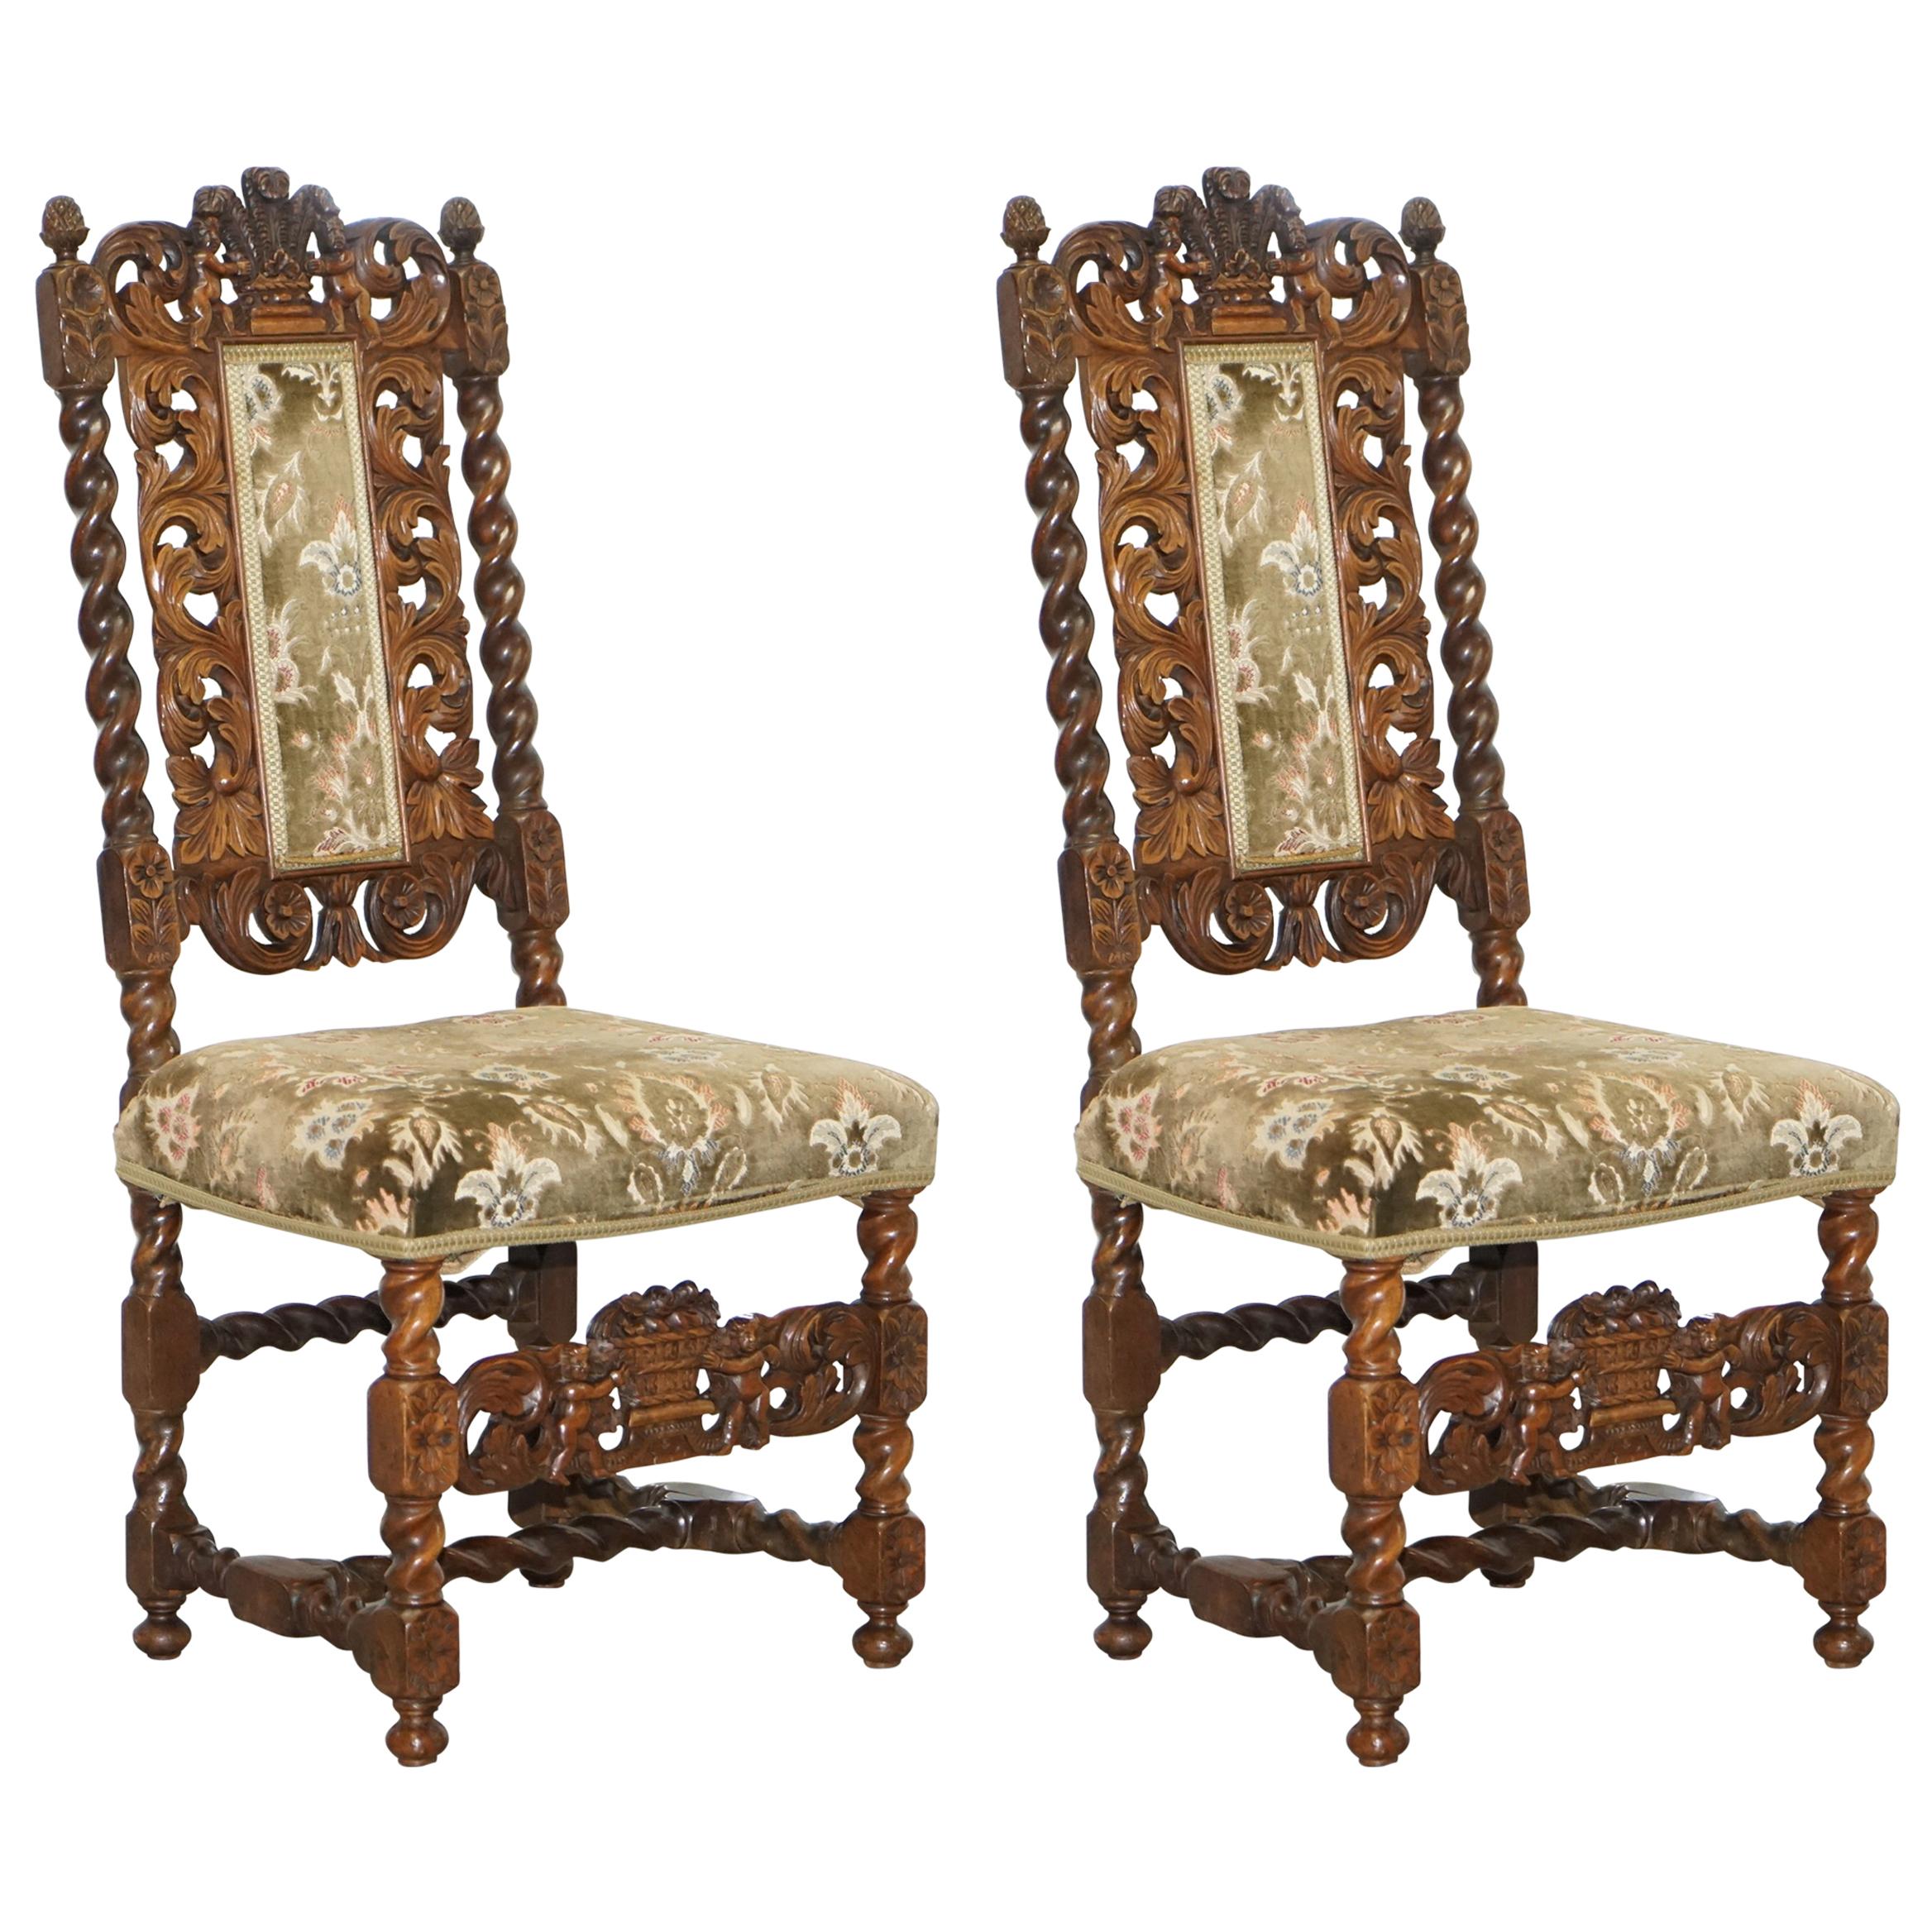 Pair of 18th Century Fruit Wood Carved Chair Cherubs Holding a Crown and Flowers For Sale